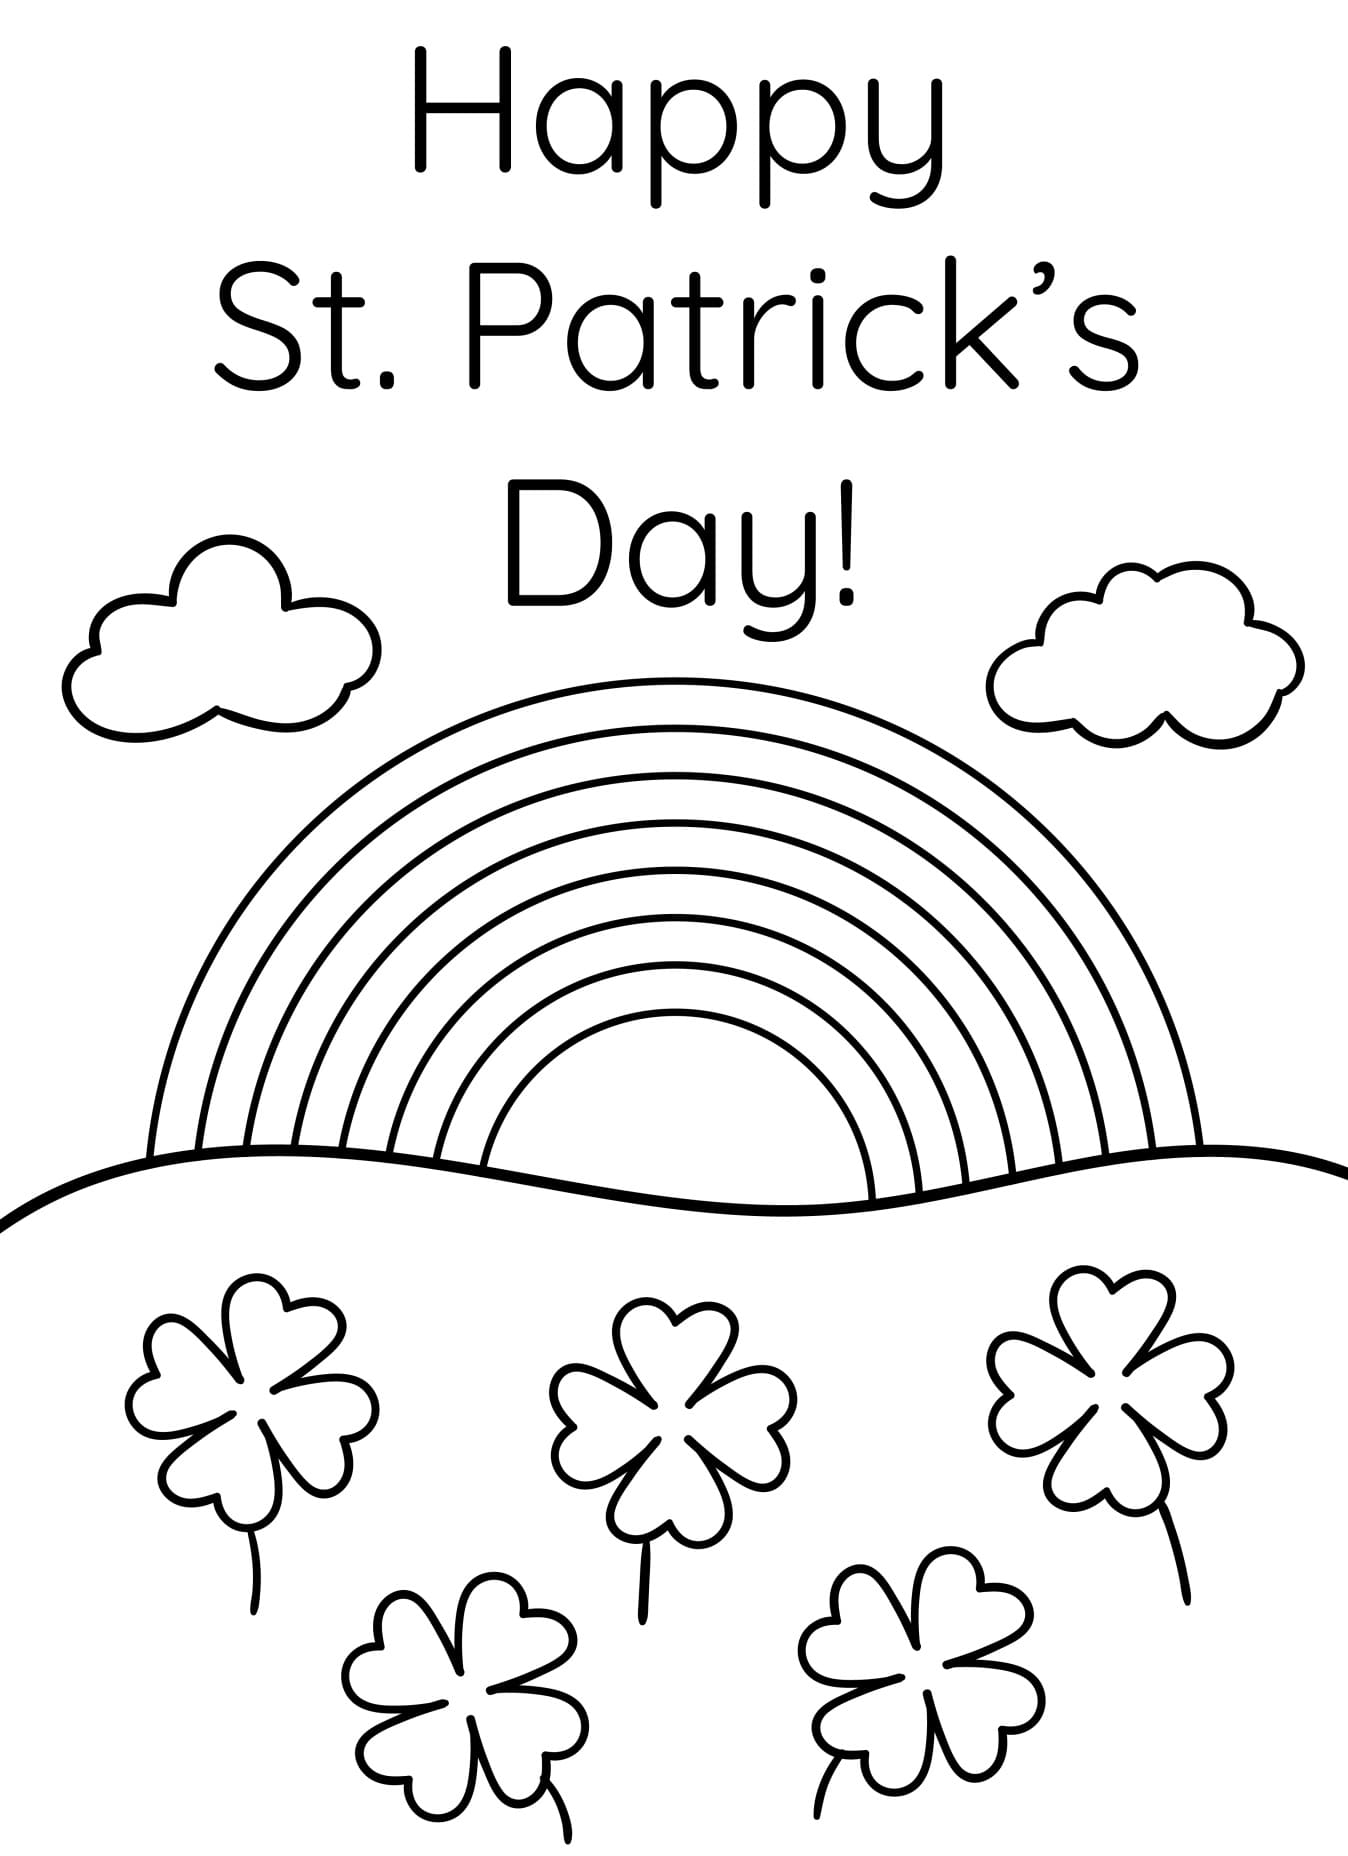 Free Happy St. Patrick's Day - Coloring Pages